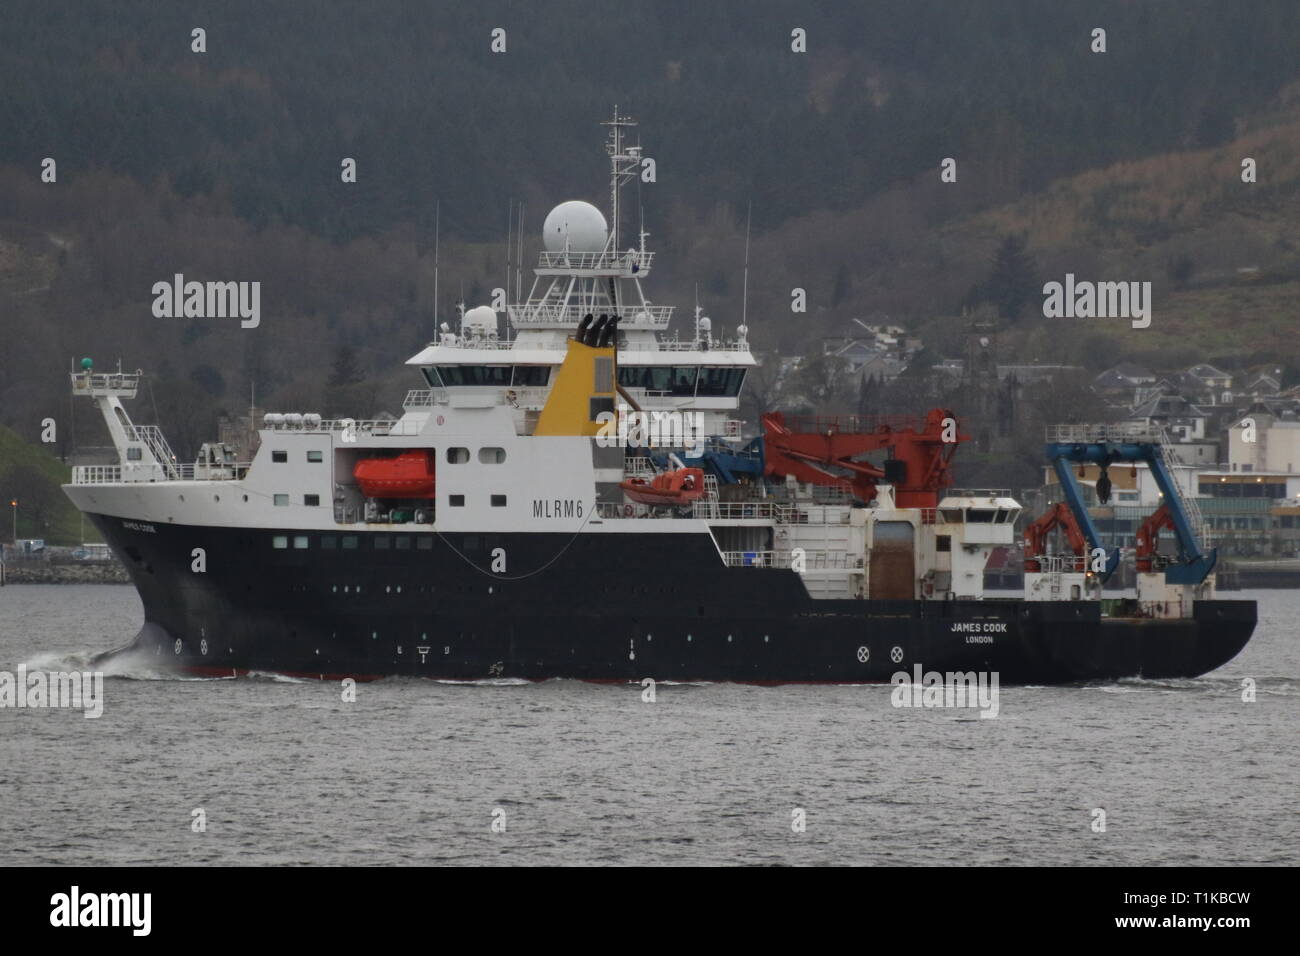 RRS James Cook, a research vessel operated by the Natural Environment Research Council, on an outbound journey after a visit to the Firth of Clyde. Stock Photo